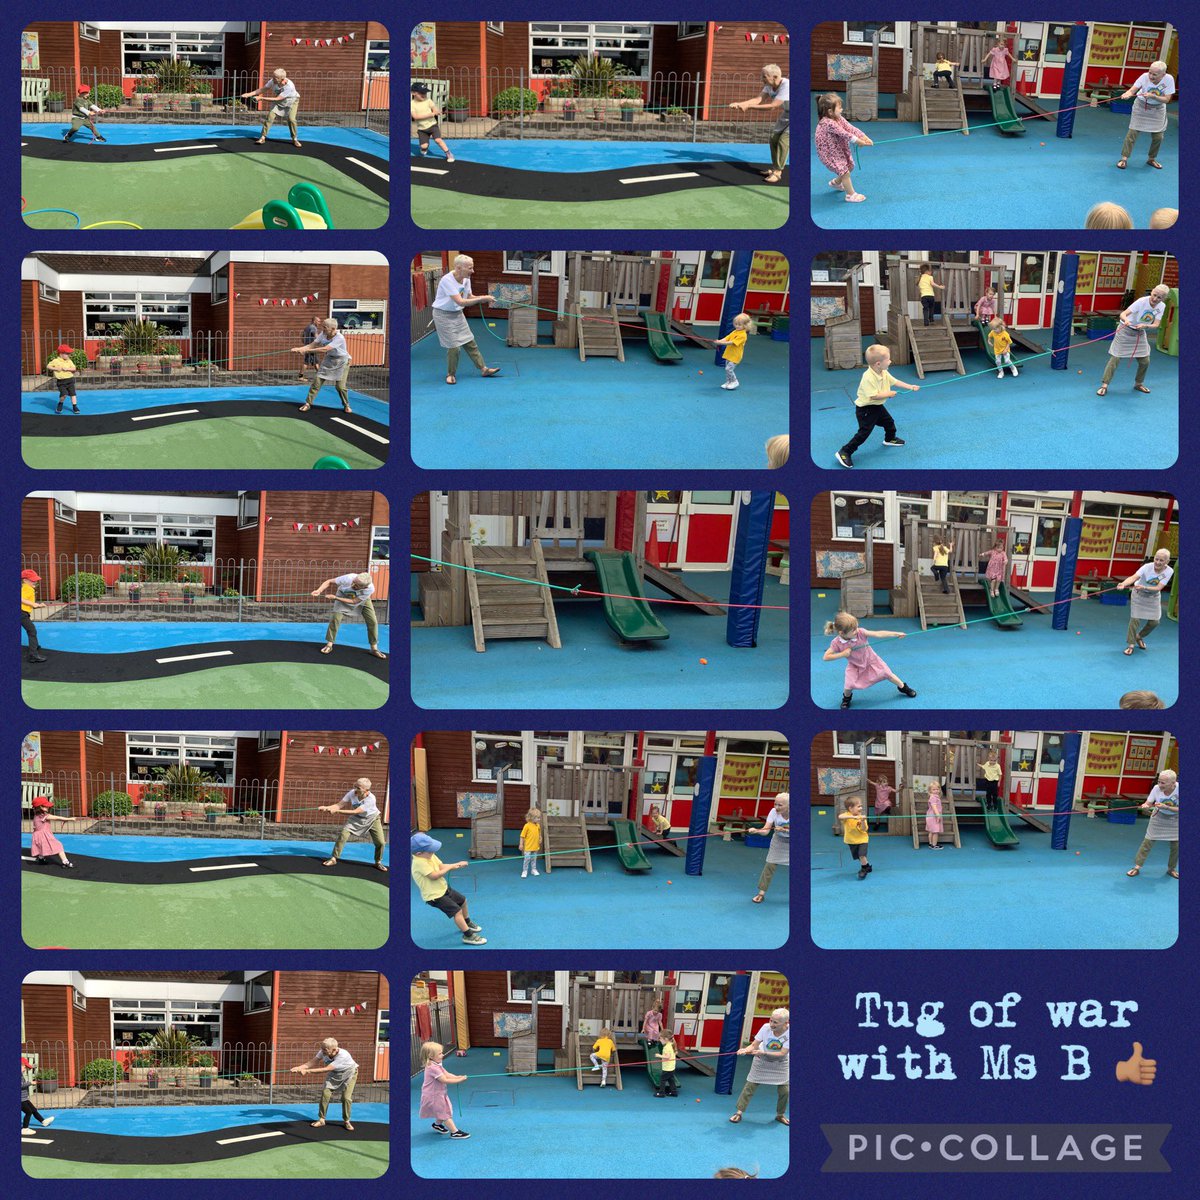 Tug of war with was so much fun 😄 Our arms were aching with all that pulling 💪🏼 Bendigedig 👏🏽👏🏽👏🏽🥰#CGWB #healthyconfidentindividuals